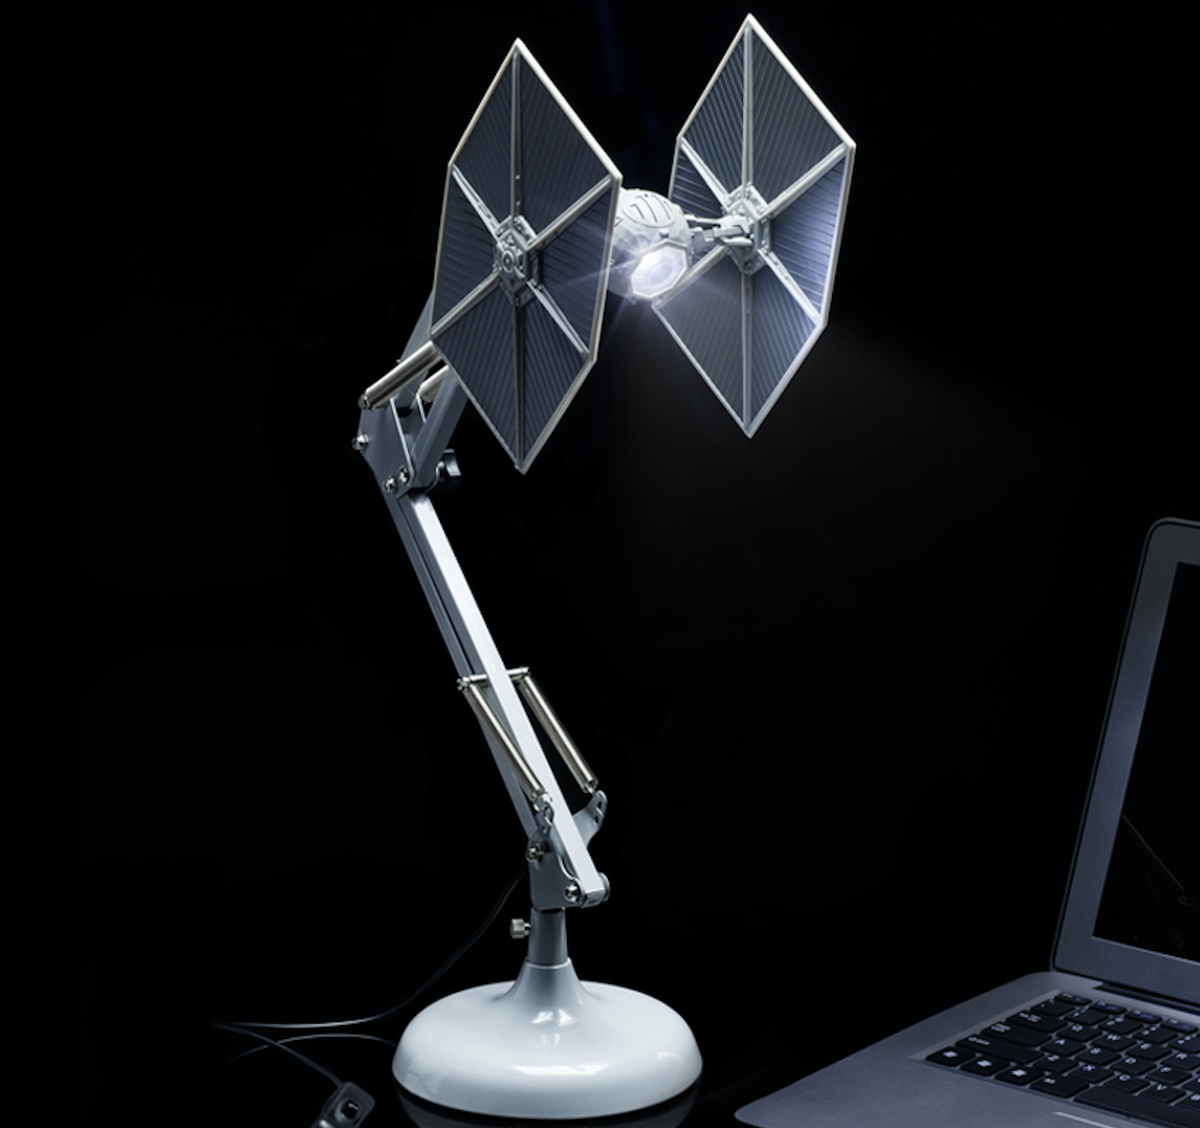 TIE Fighter Anglepoise Desk Lamp (£50)